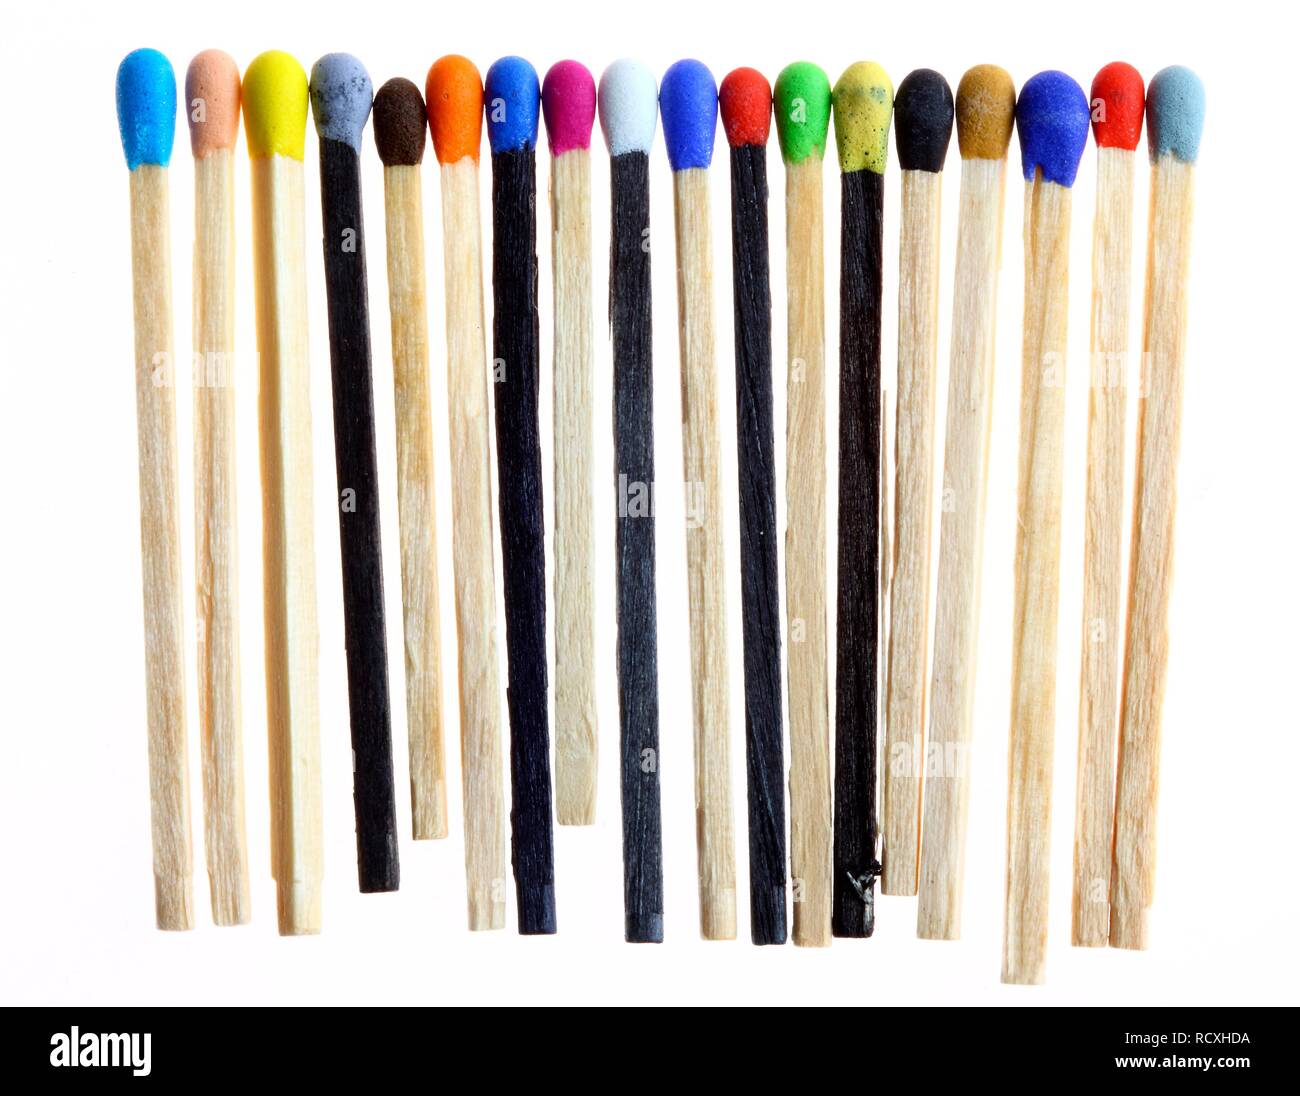 Matches, with different coloured match heads and sticks Stock Photo